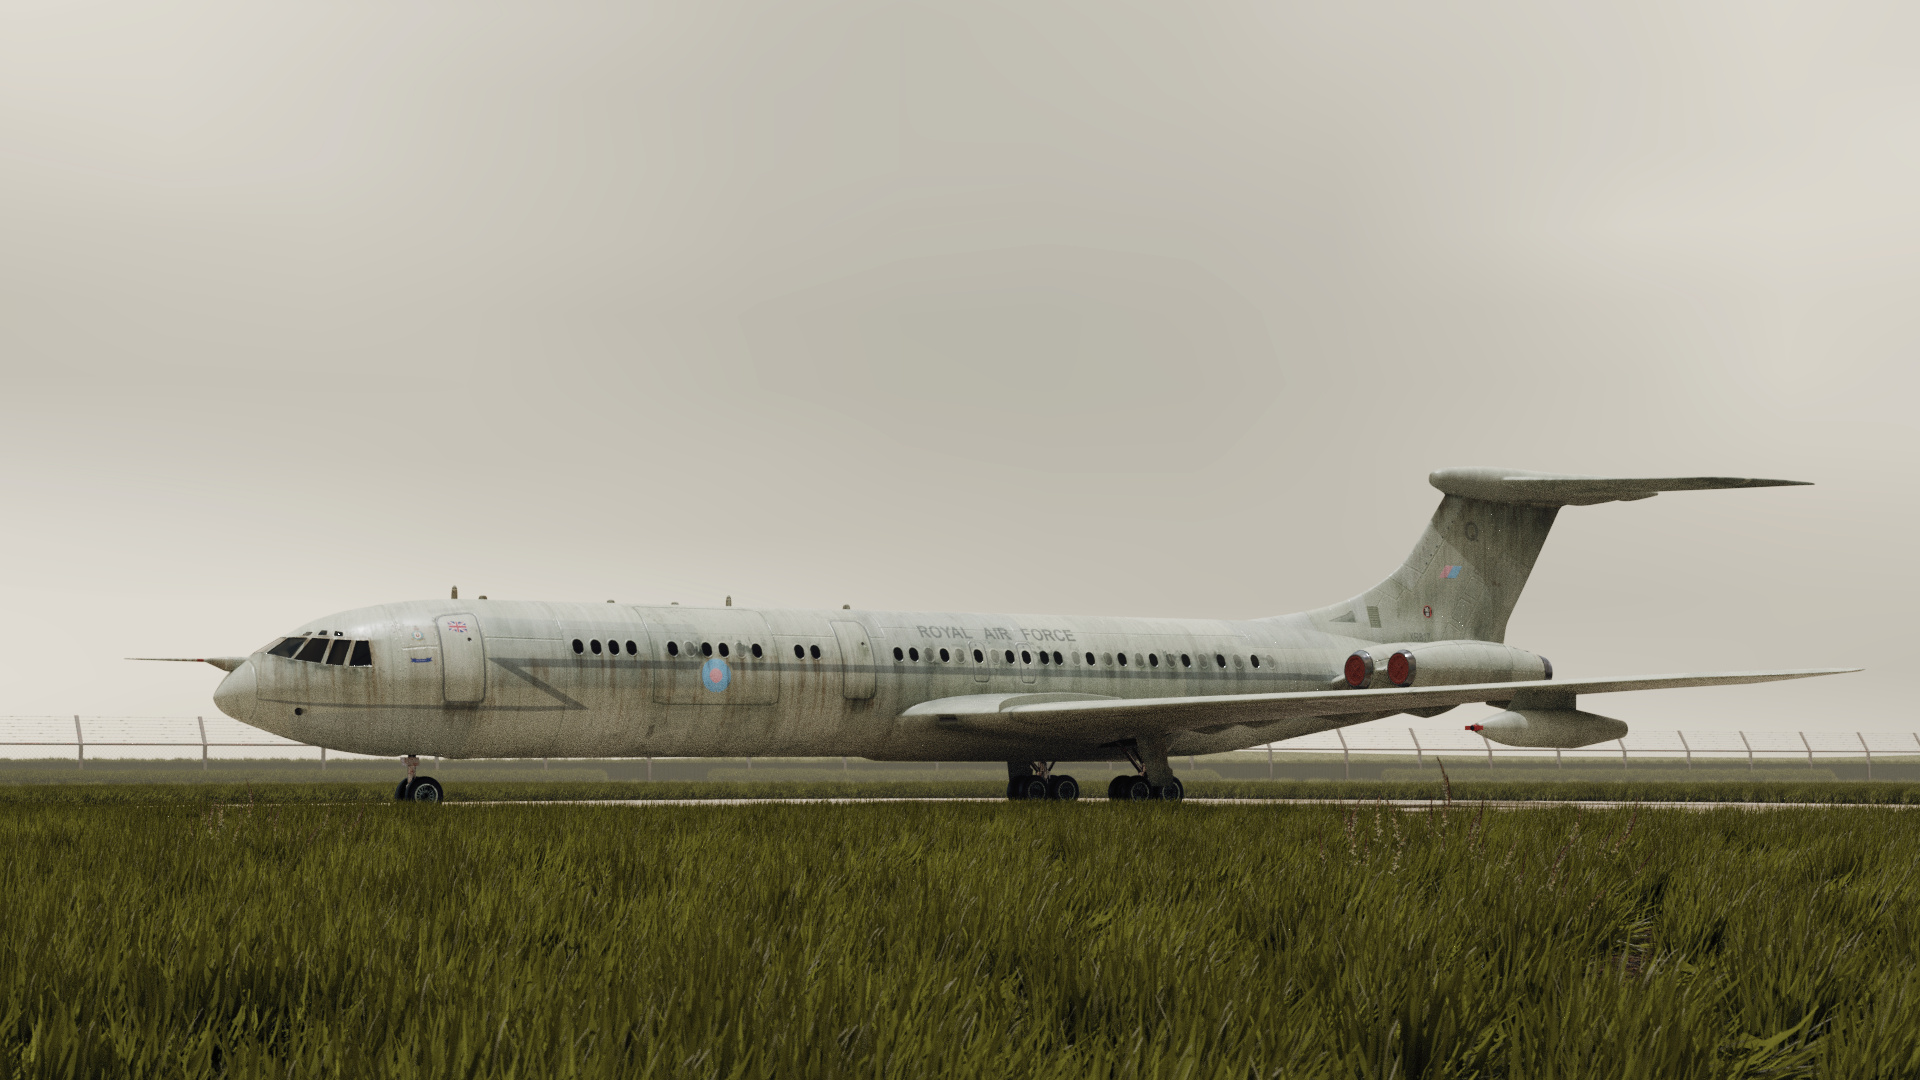 Vickers VC10 Wallpapers (12+ images inside)